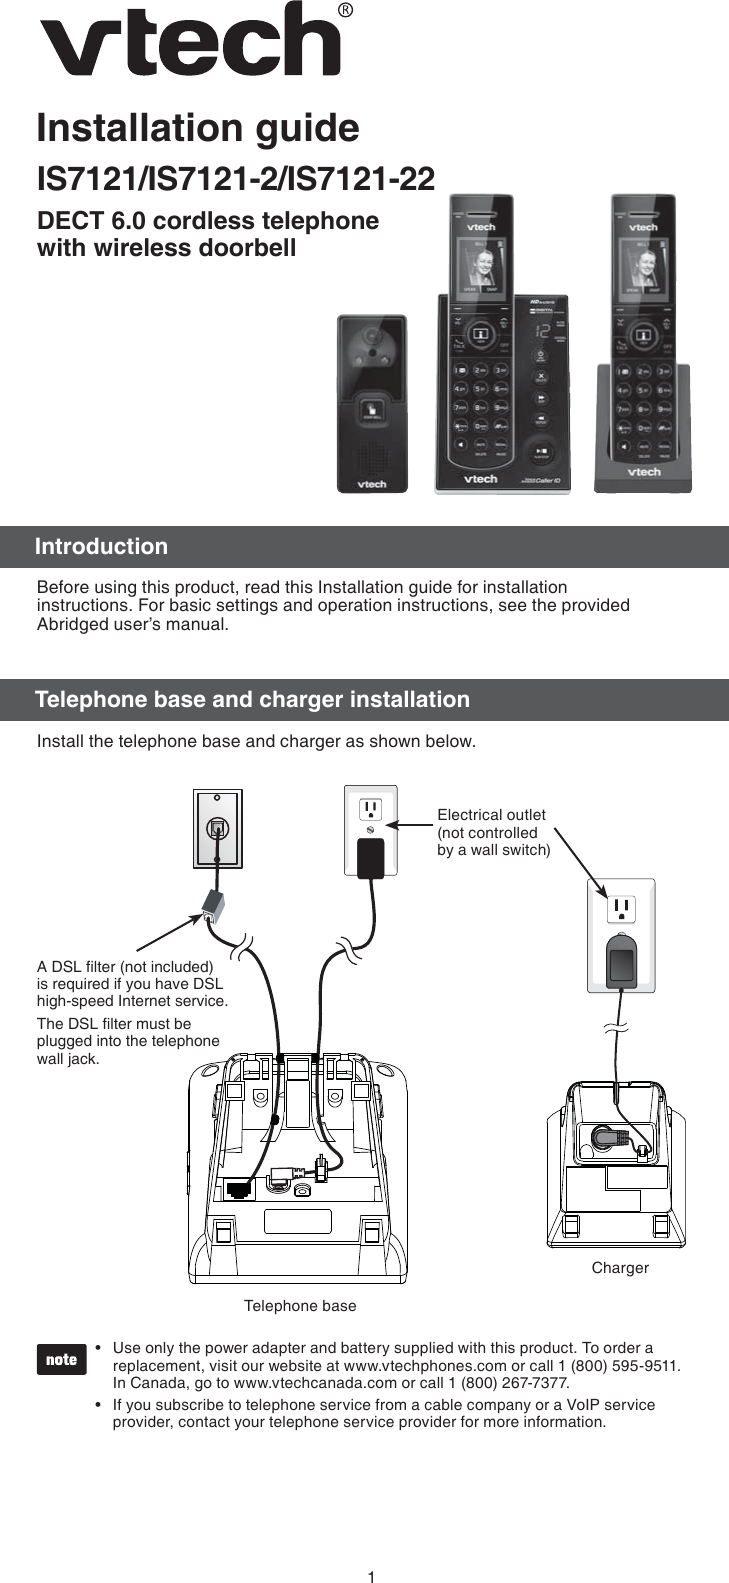 1Installation guideIS7121/IS7121-2/IS7121-22DECT 6.0 cordless telephone  with wireless doorbellBefore using this product, read this Installation guide for installation  instructions. For basic settings and operation instructions, see the provided Abridged user’s manual.Install the telephone base and charger as shown below.Use only the power adapter and battery supplied with this product. To order a replacement, visit our website at www.vtechphones.com or call 1 (800) 595-9511.  In Canada, go to www.vtechcanada.com or call 1 (800) 267-7377.If you subscribe to telephone service from a cable company or a VoIP service provider, contact your telephone service provider for more information.••Telephone baseElectrical outlet (not controlled by a wall switch)A DSL ﬁlter (not included) is required if you have DSL high-speed Internet service.The DSL ﬁlter must be plugged into the telephone wall jack.ChargerIntroductionTelephone base and charger installation